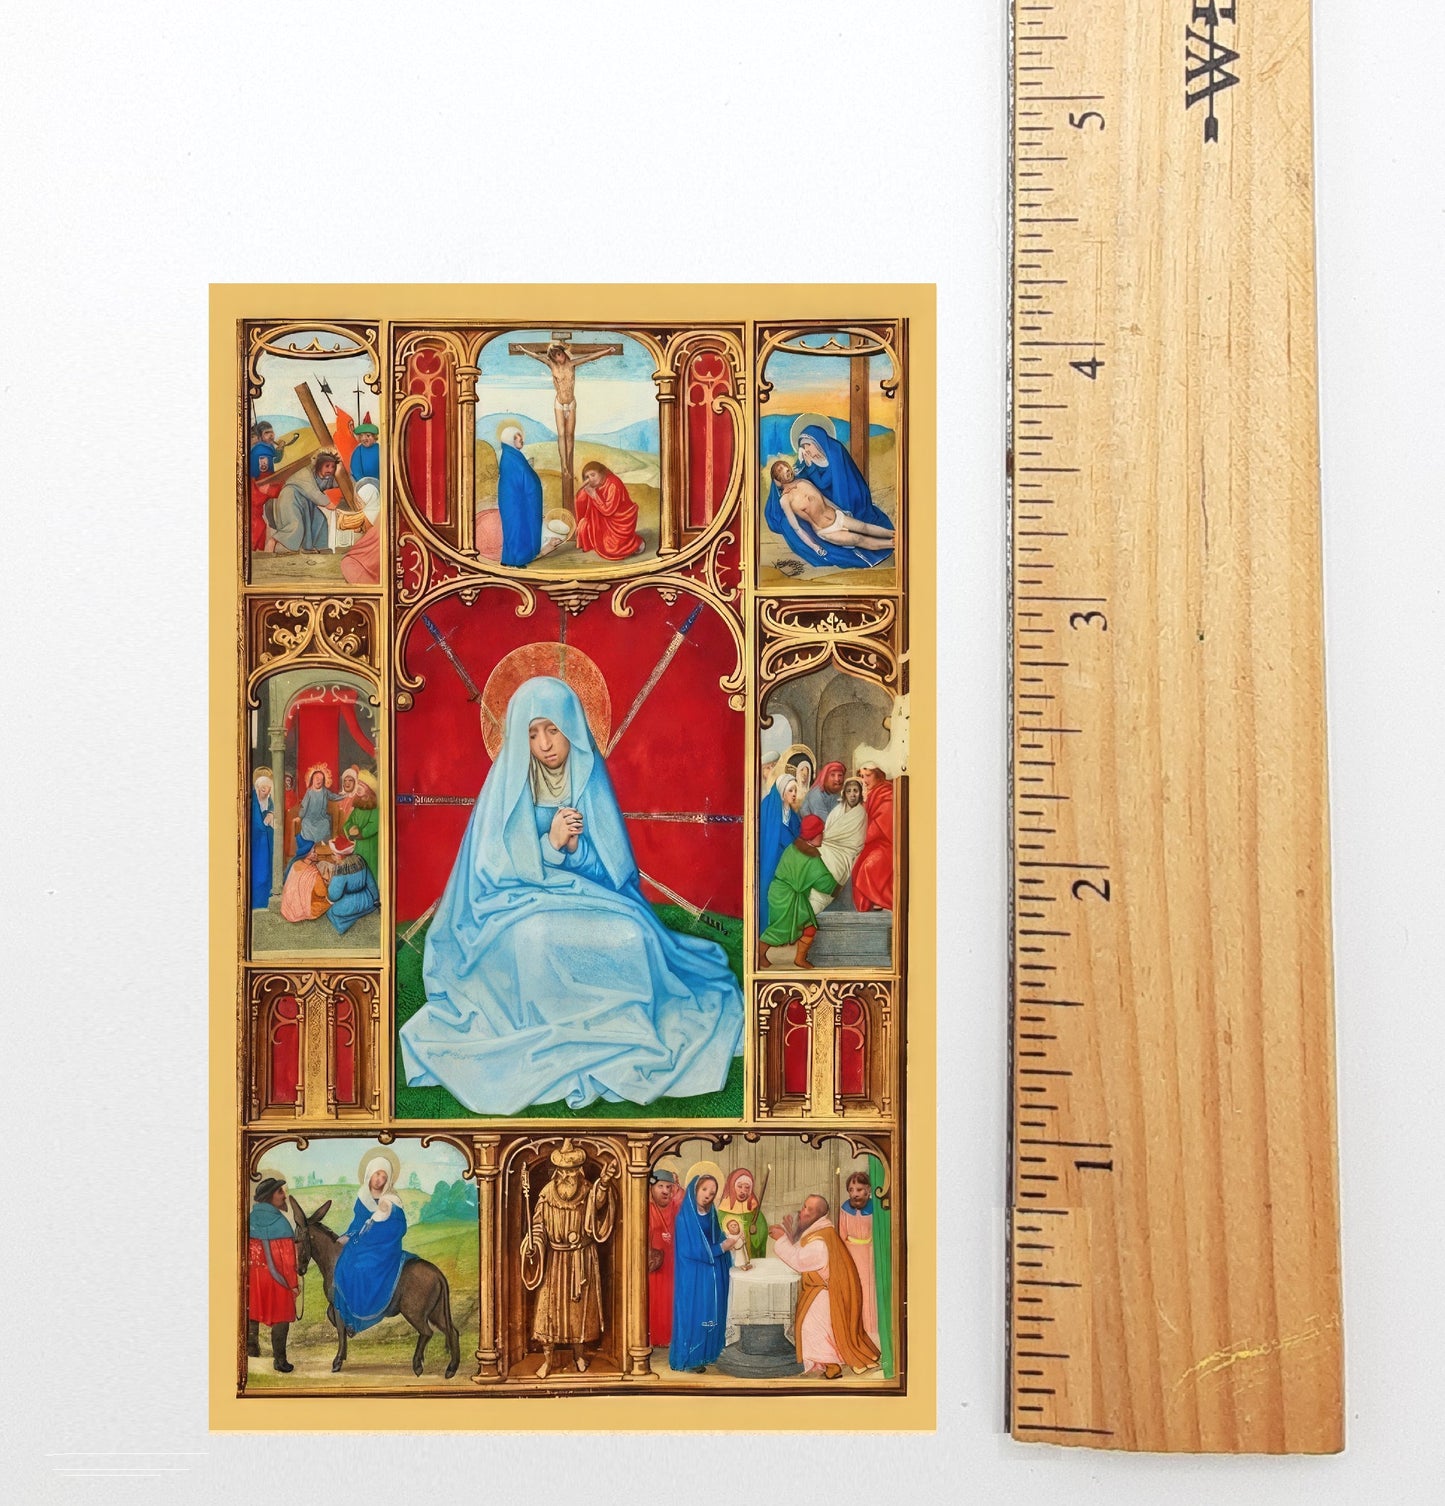 New! Holy Card – Our Lady of Sorrows – pack of 10/100/1000 – Restored Vintage Holy Card